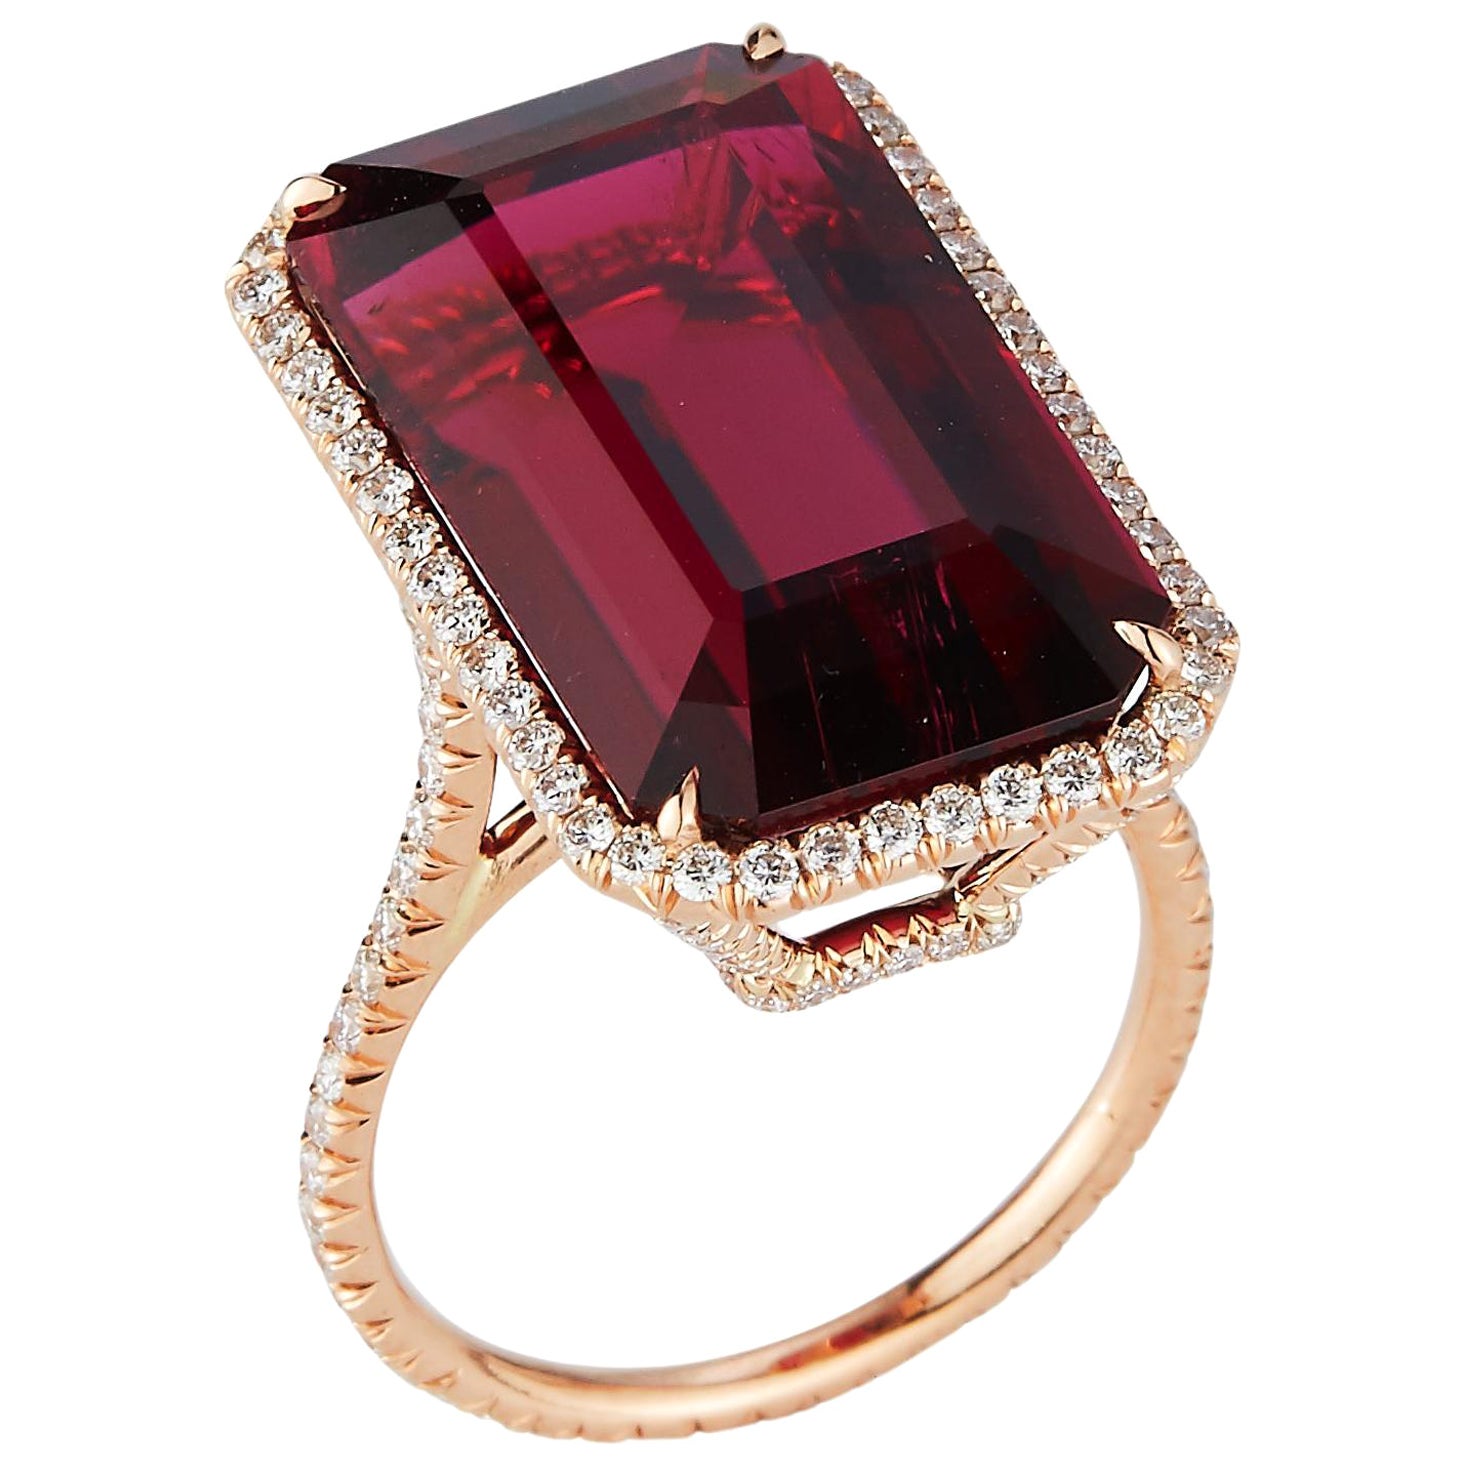 20 Carat Rubellite Tourmaline and Diamond Cocktail Ring For Sale